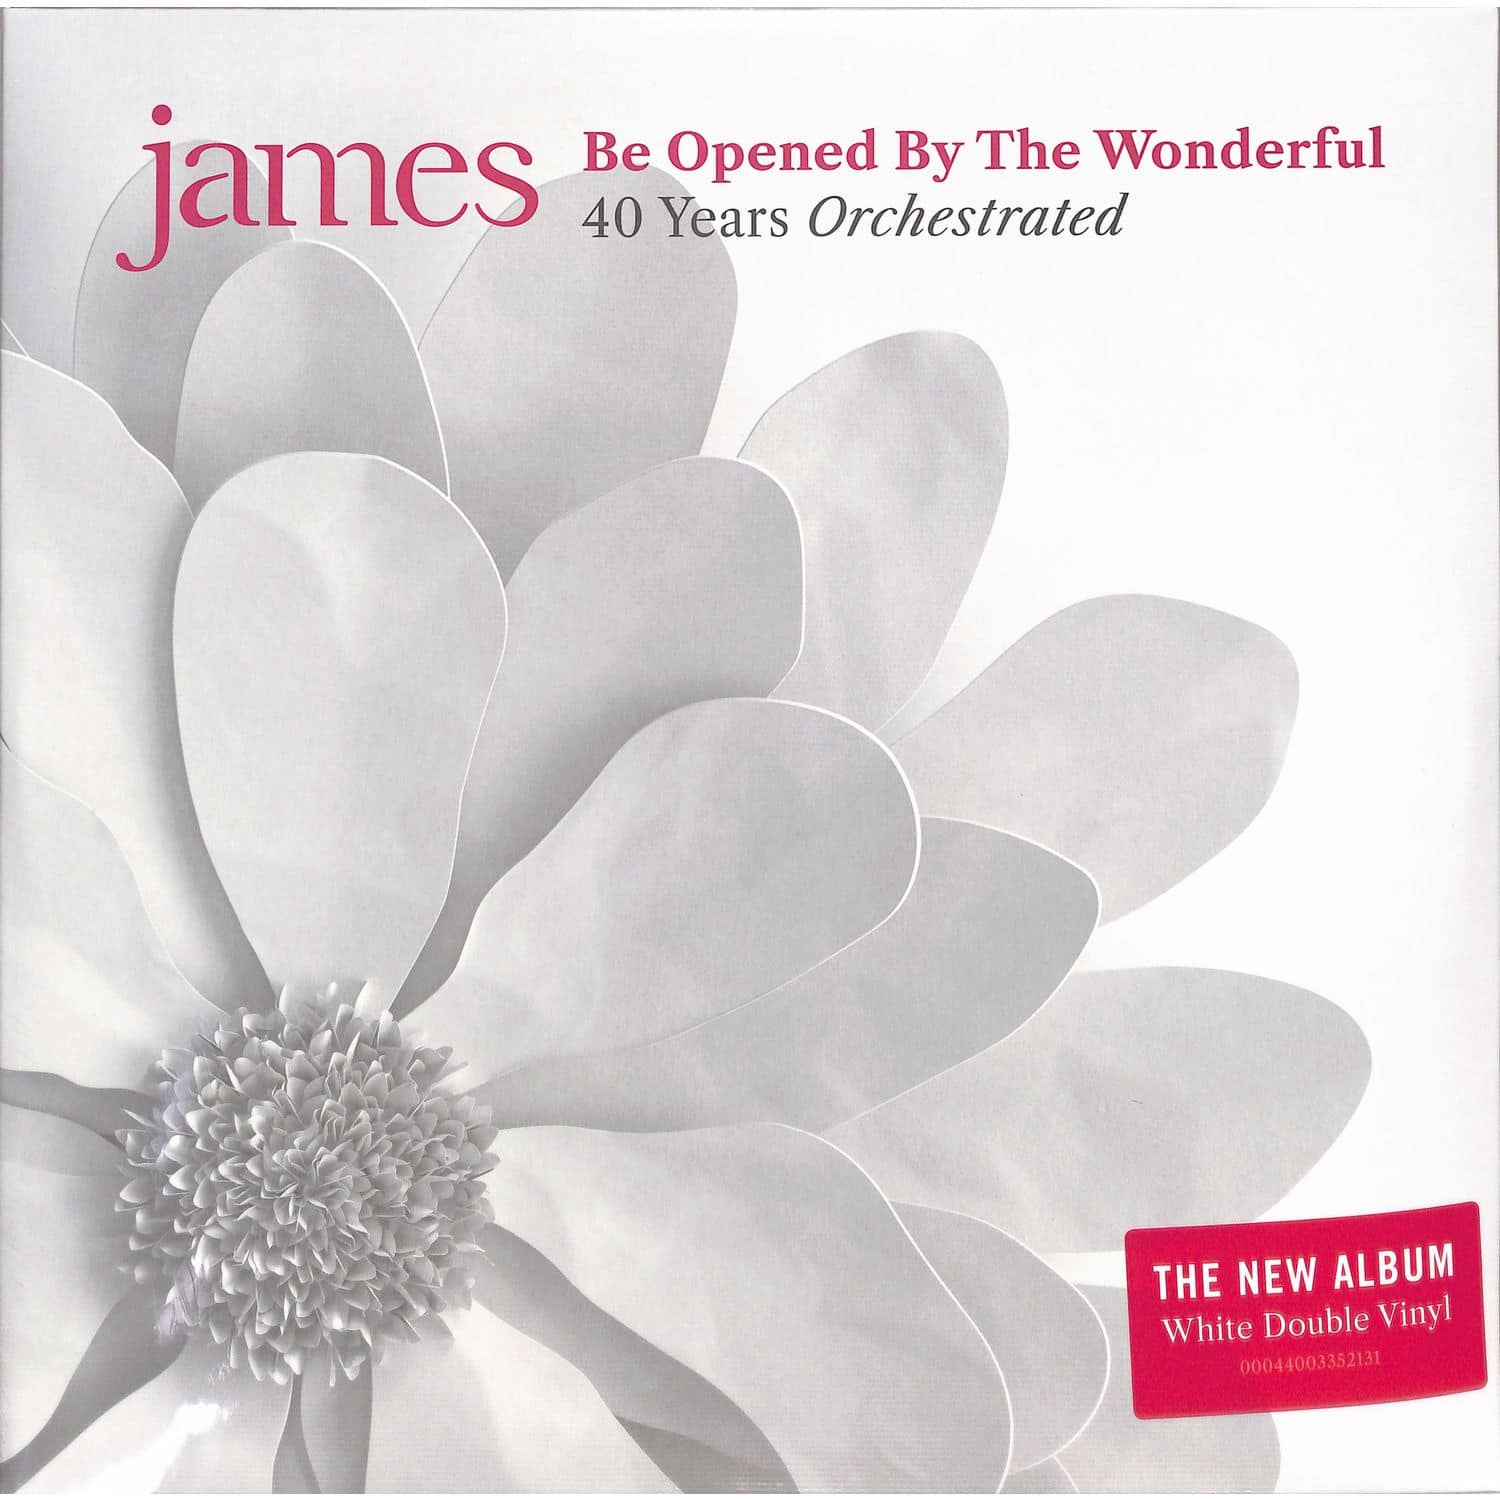 James - BE OPENED BY THE WONDERFUL 